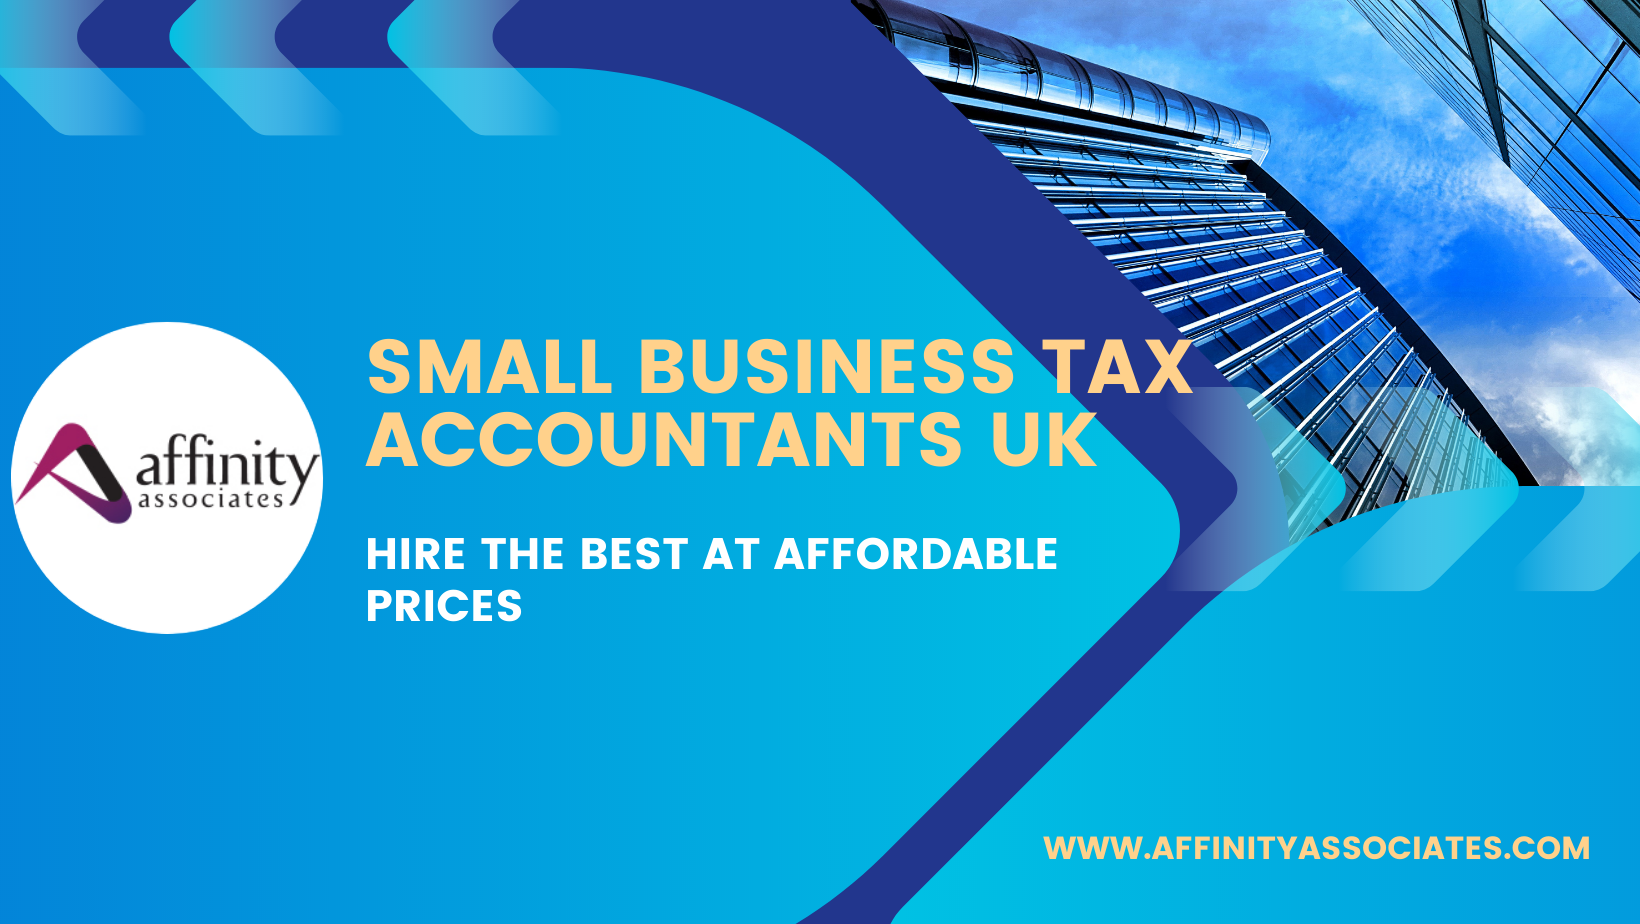 Small Business Tax Accountants UK – Hire the Best at Affordable Prices